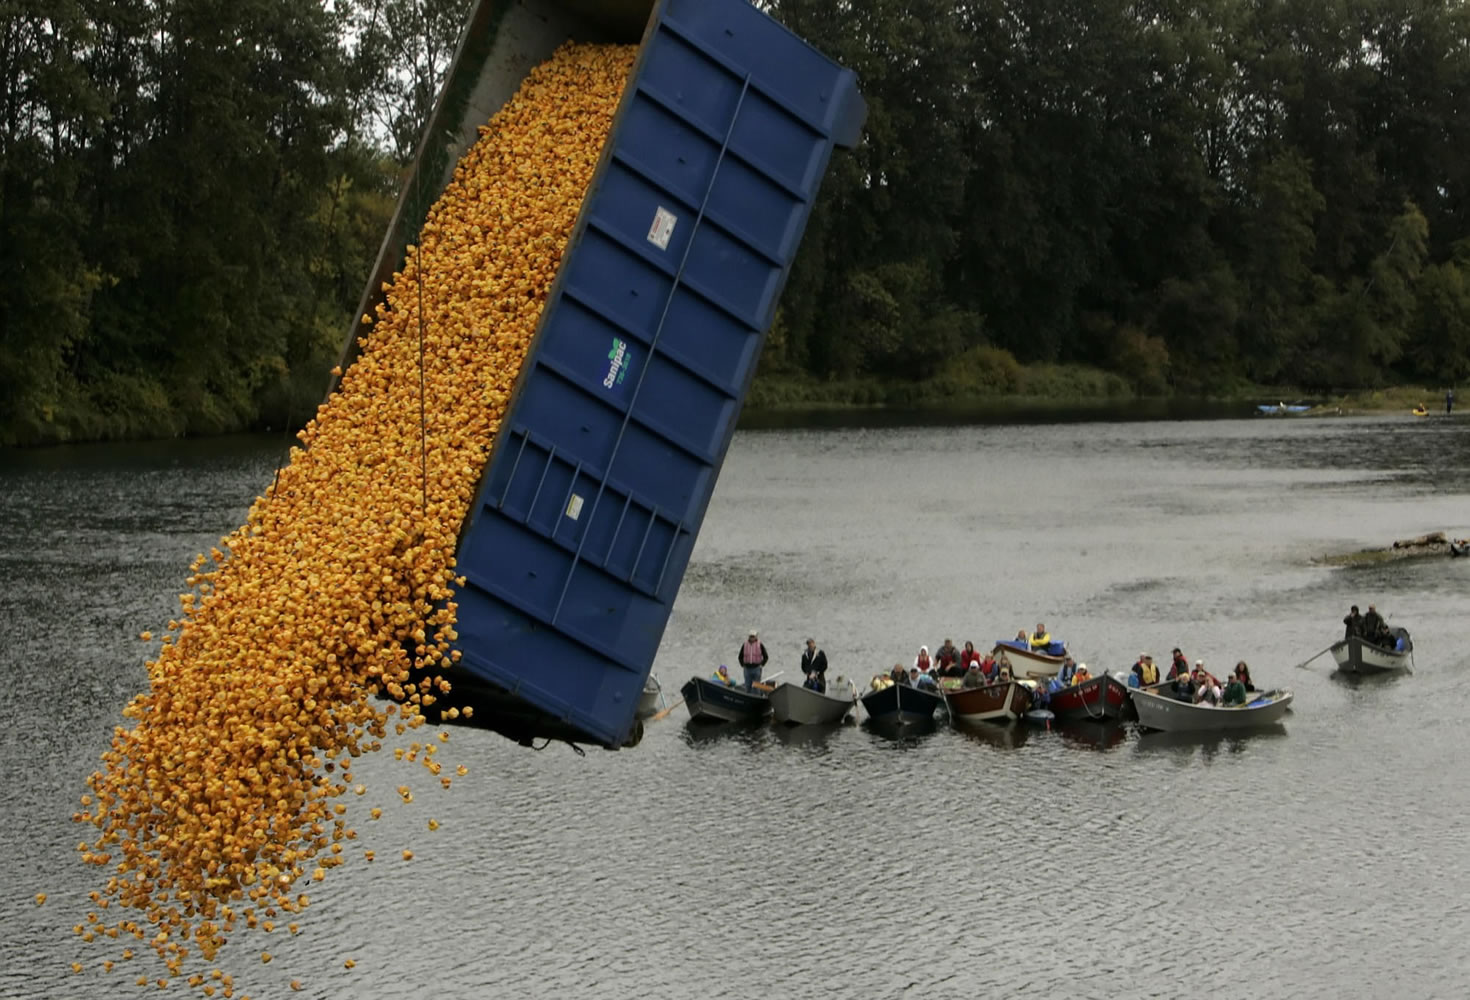 Boaters watch as thousands of rubber ducks are released into the Willamette River in 2007 at the Autzen Footbridge during the annual Rotary Duck Race in Eugene, Ore.